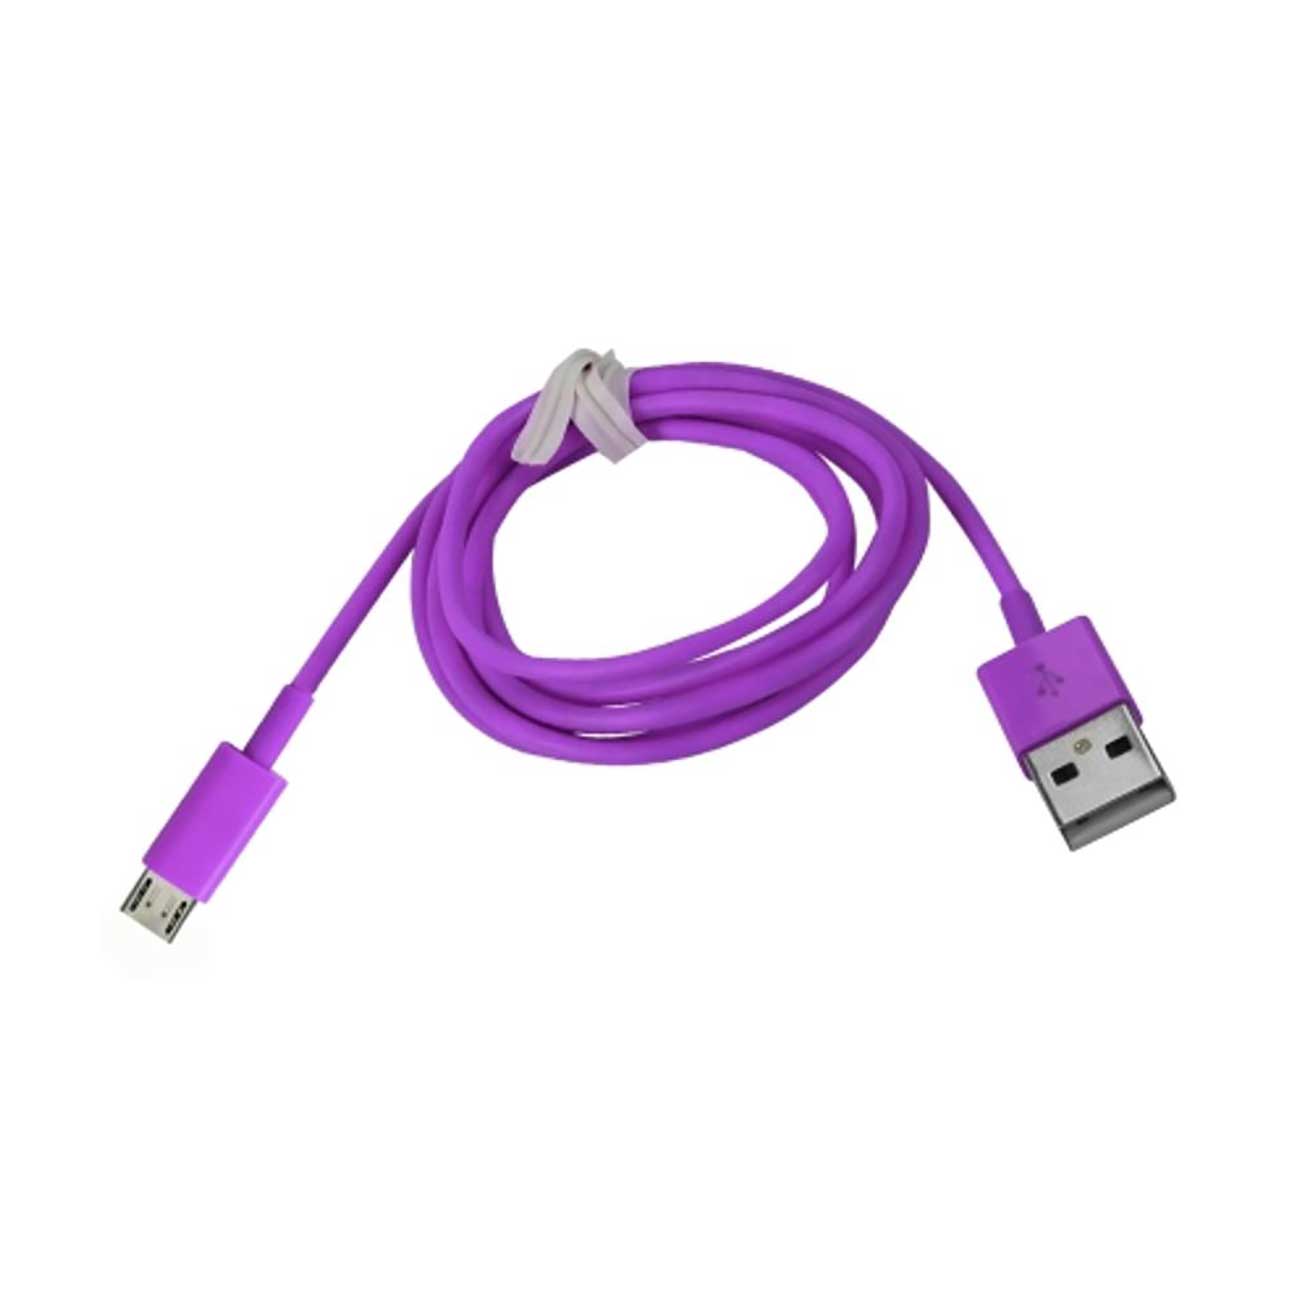 Travel Adapter Charger Micro USB With Cable Portable 1A Reiko Purple Color